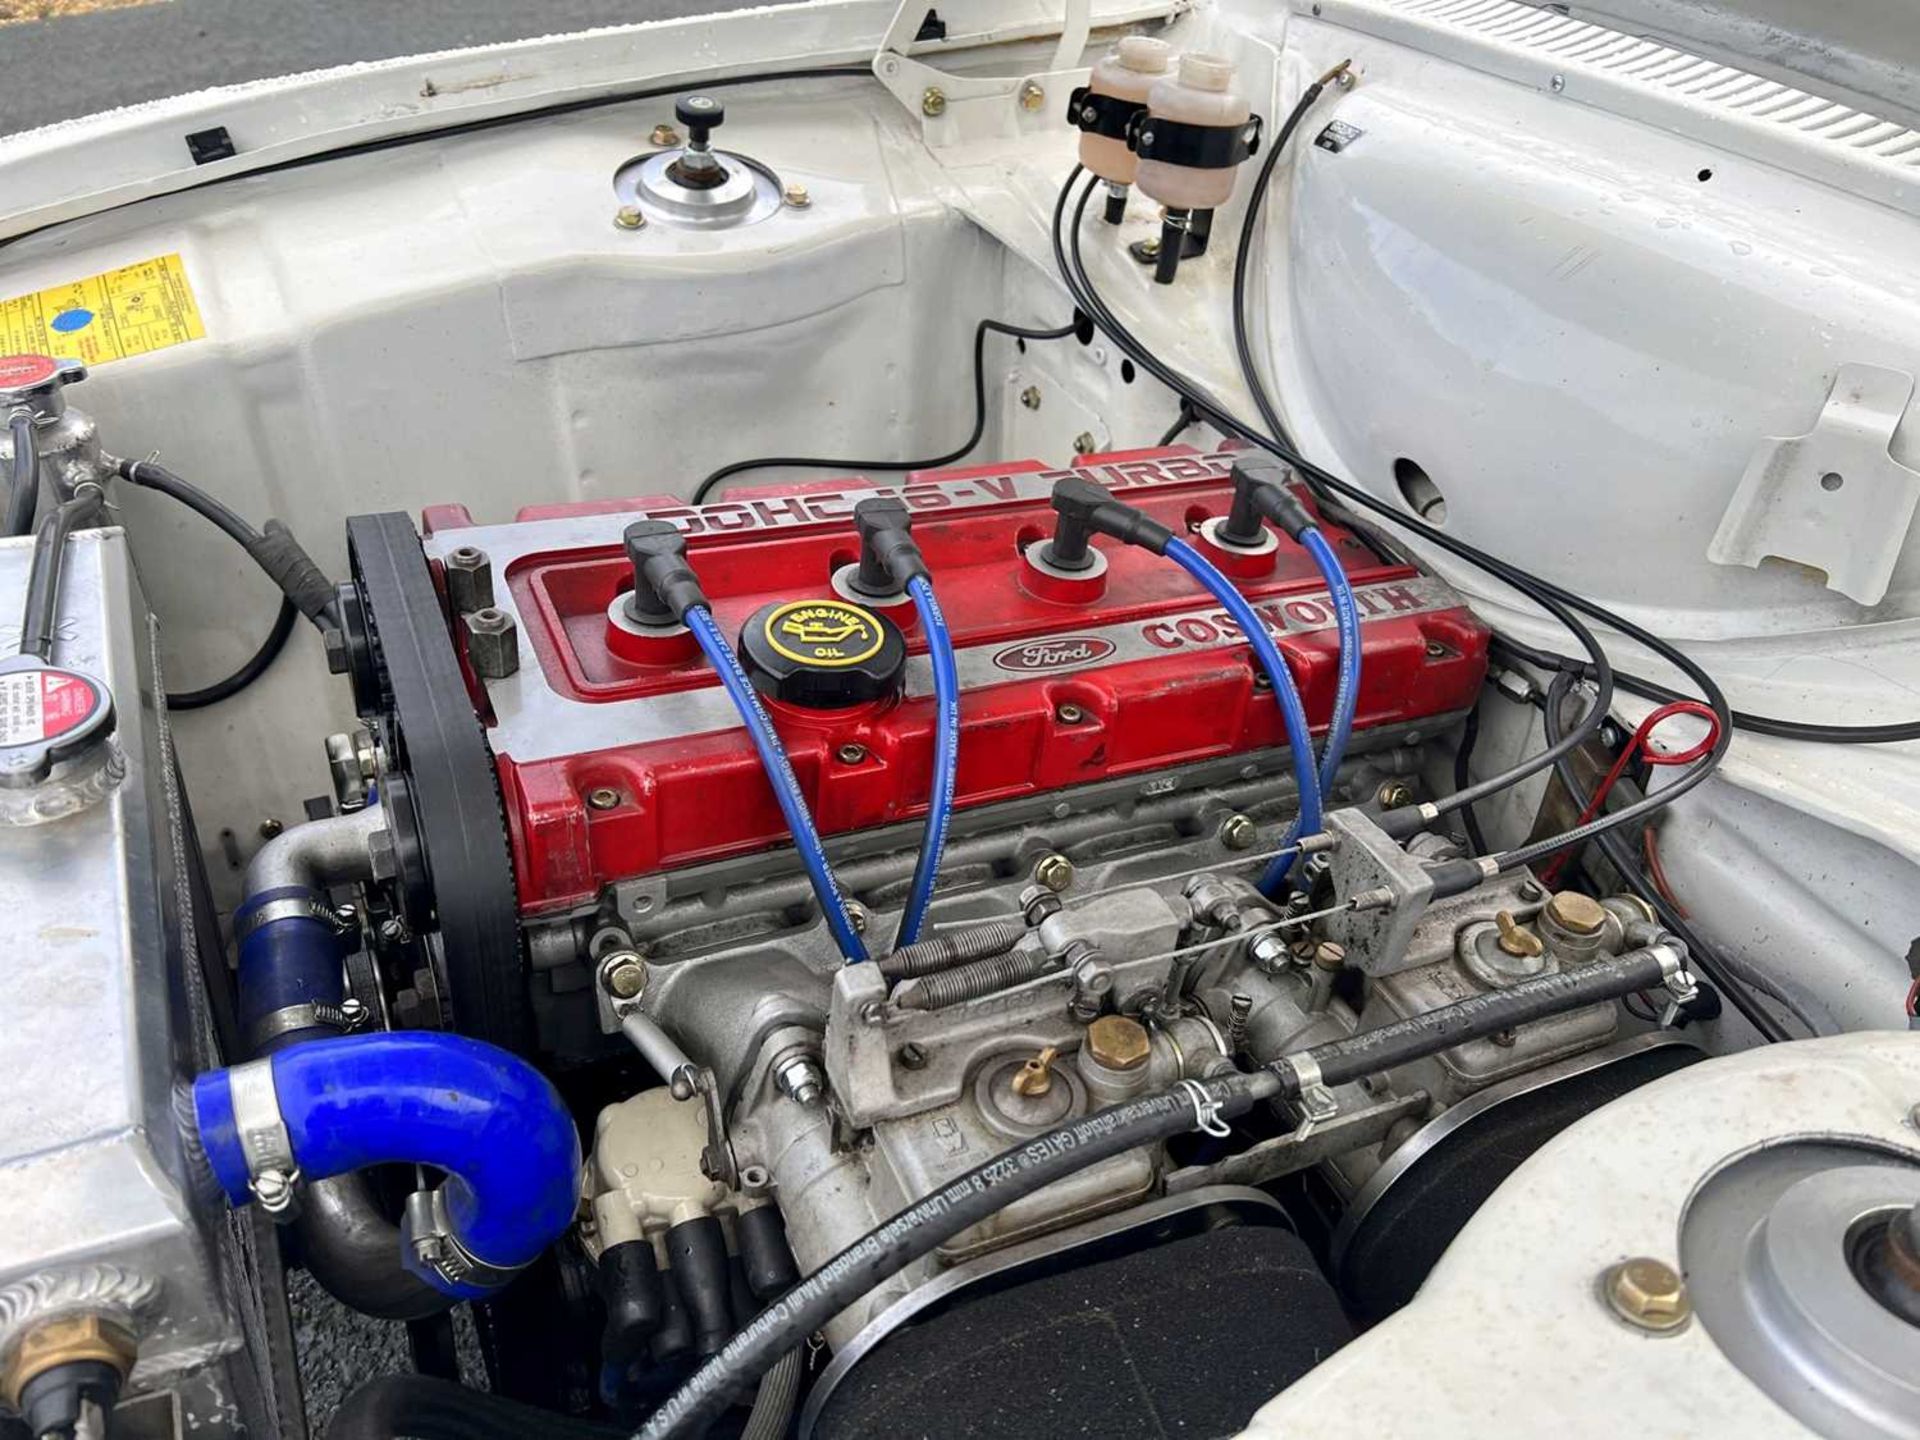 1971 Ford Escort Mexico with 2.1-litre Cosworth engine 2.1-Litre naturally aspirated Cosworth engine - Image 32 of 55